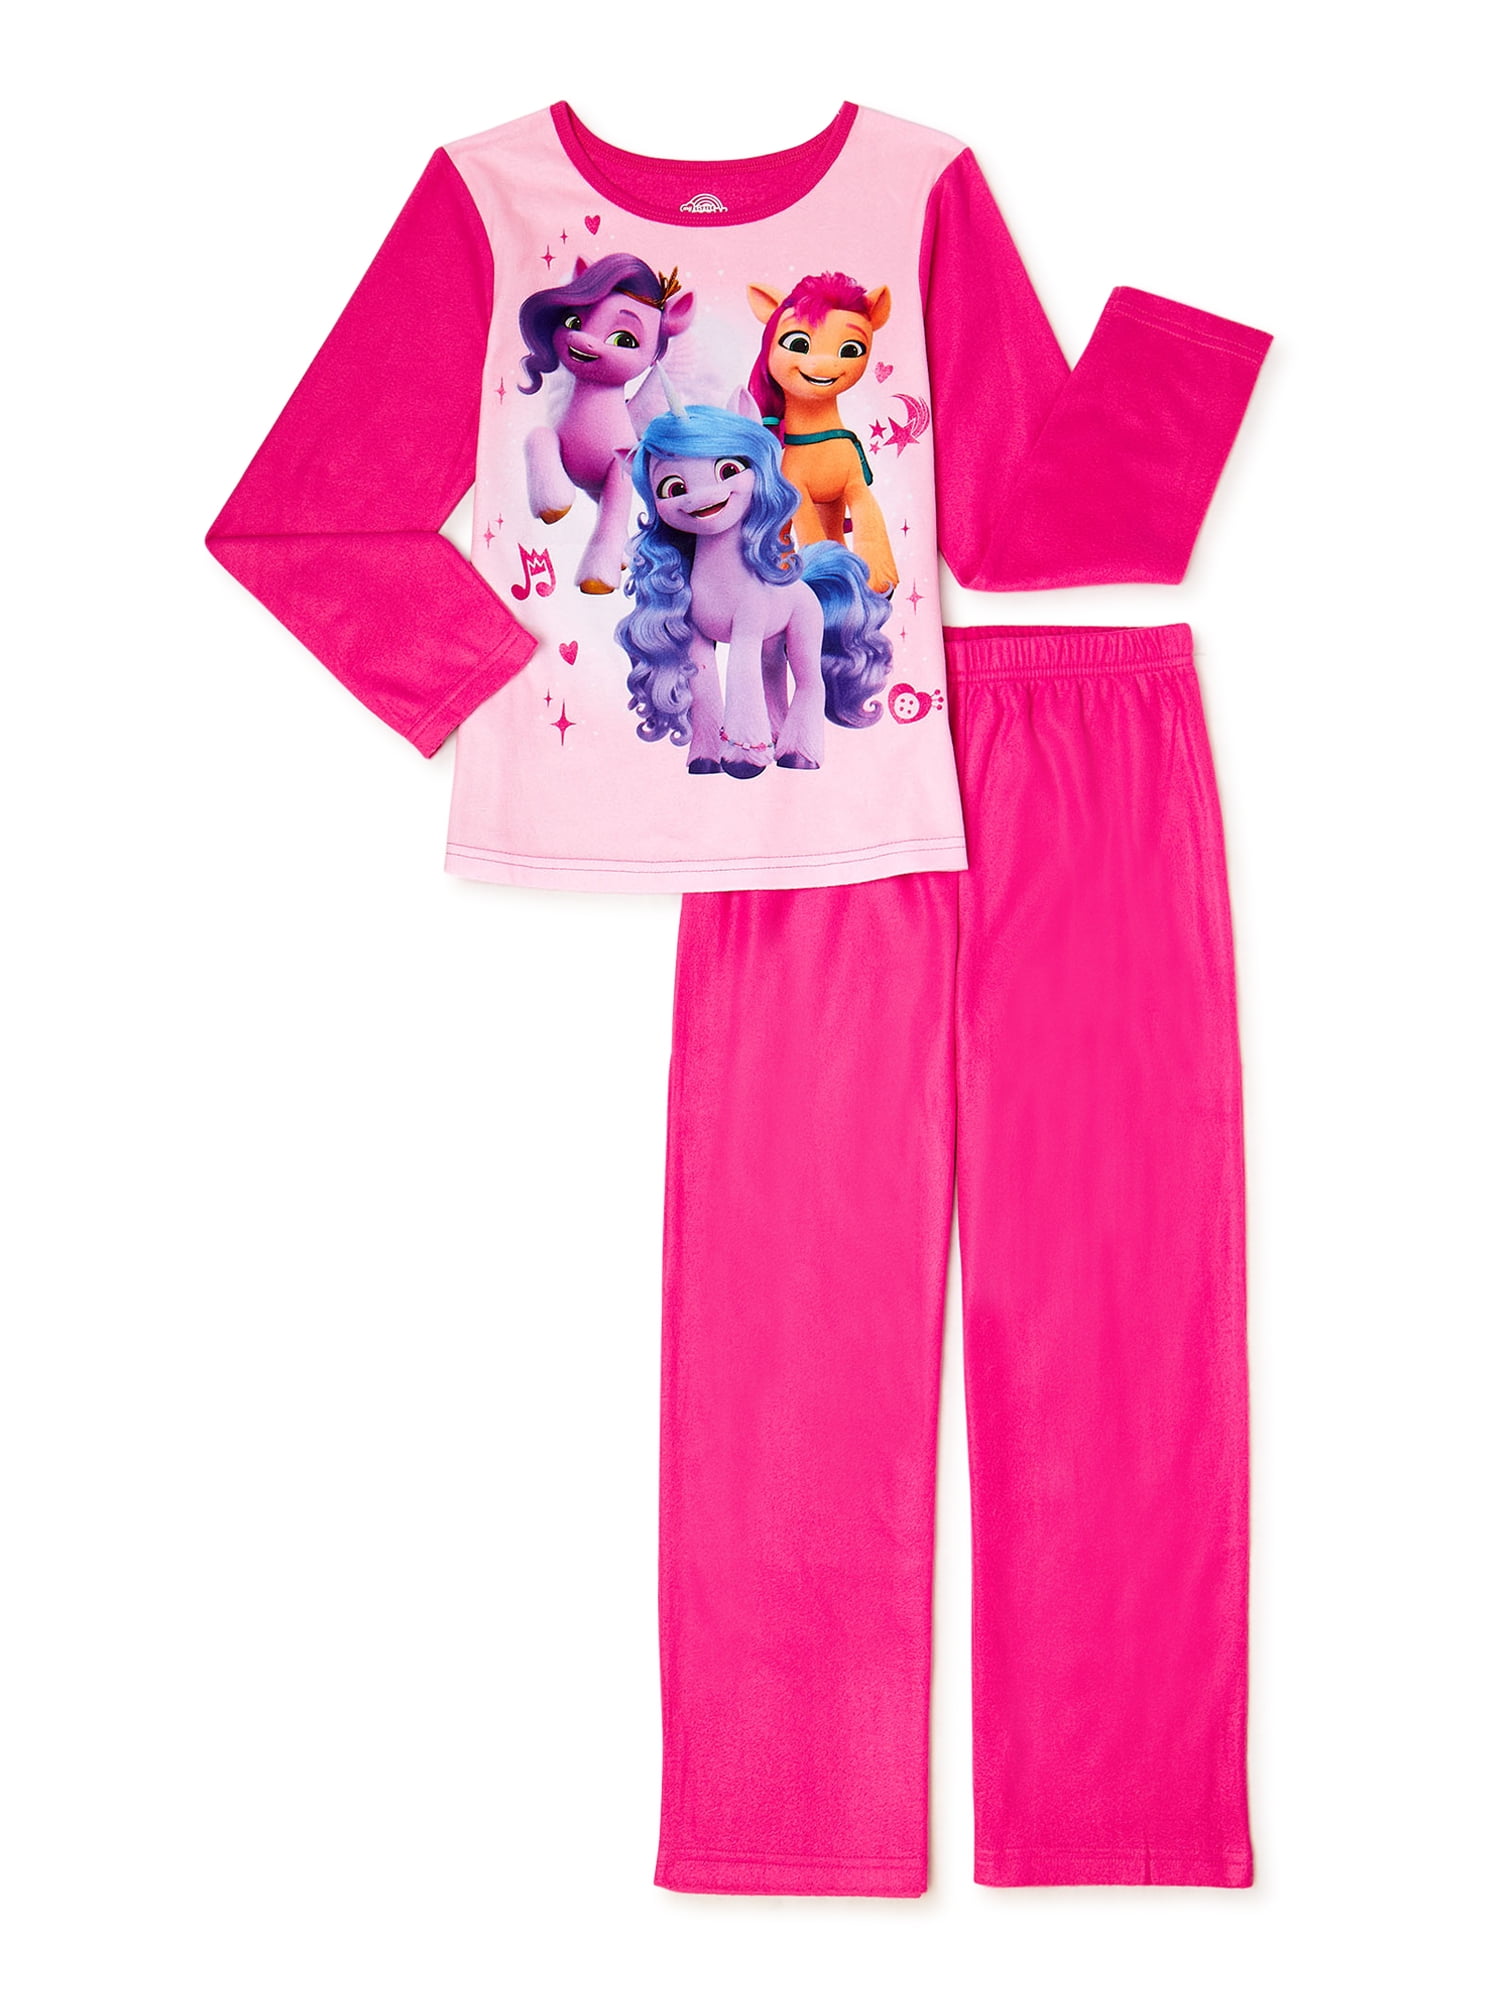 Just Character NEW Girls Toddler My Little Pony Pyjamas 18 months 2 3 4 5 Years 